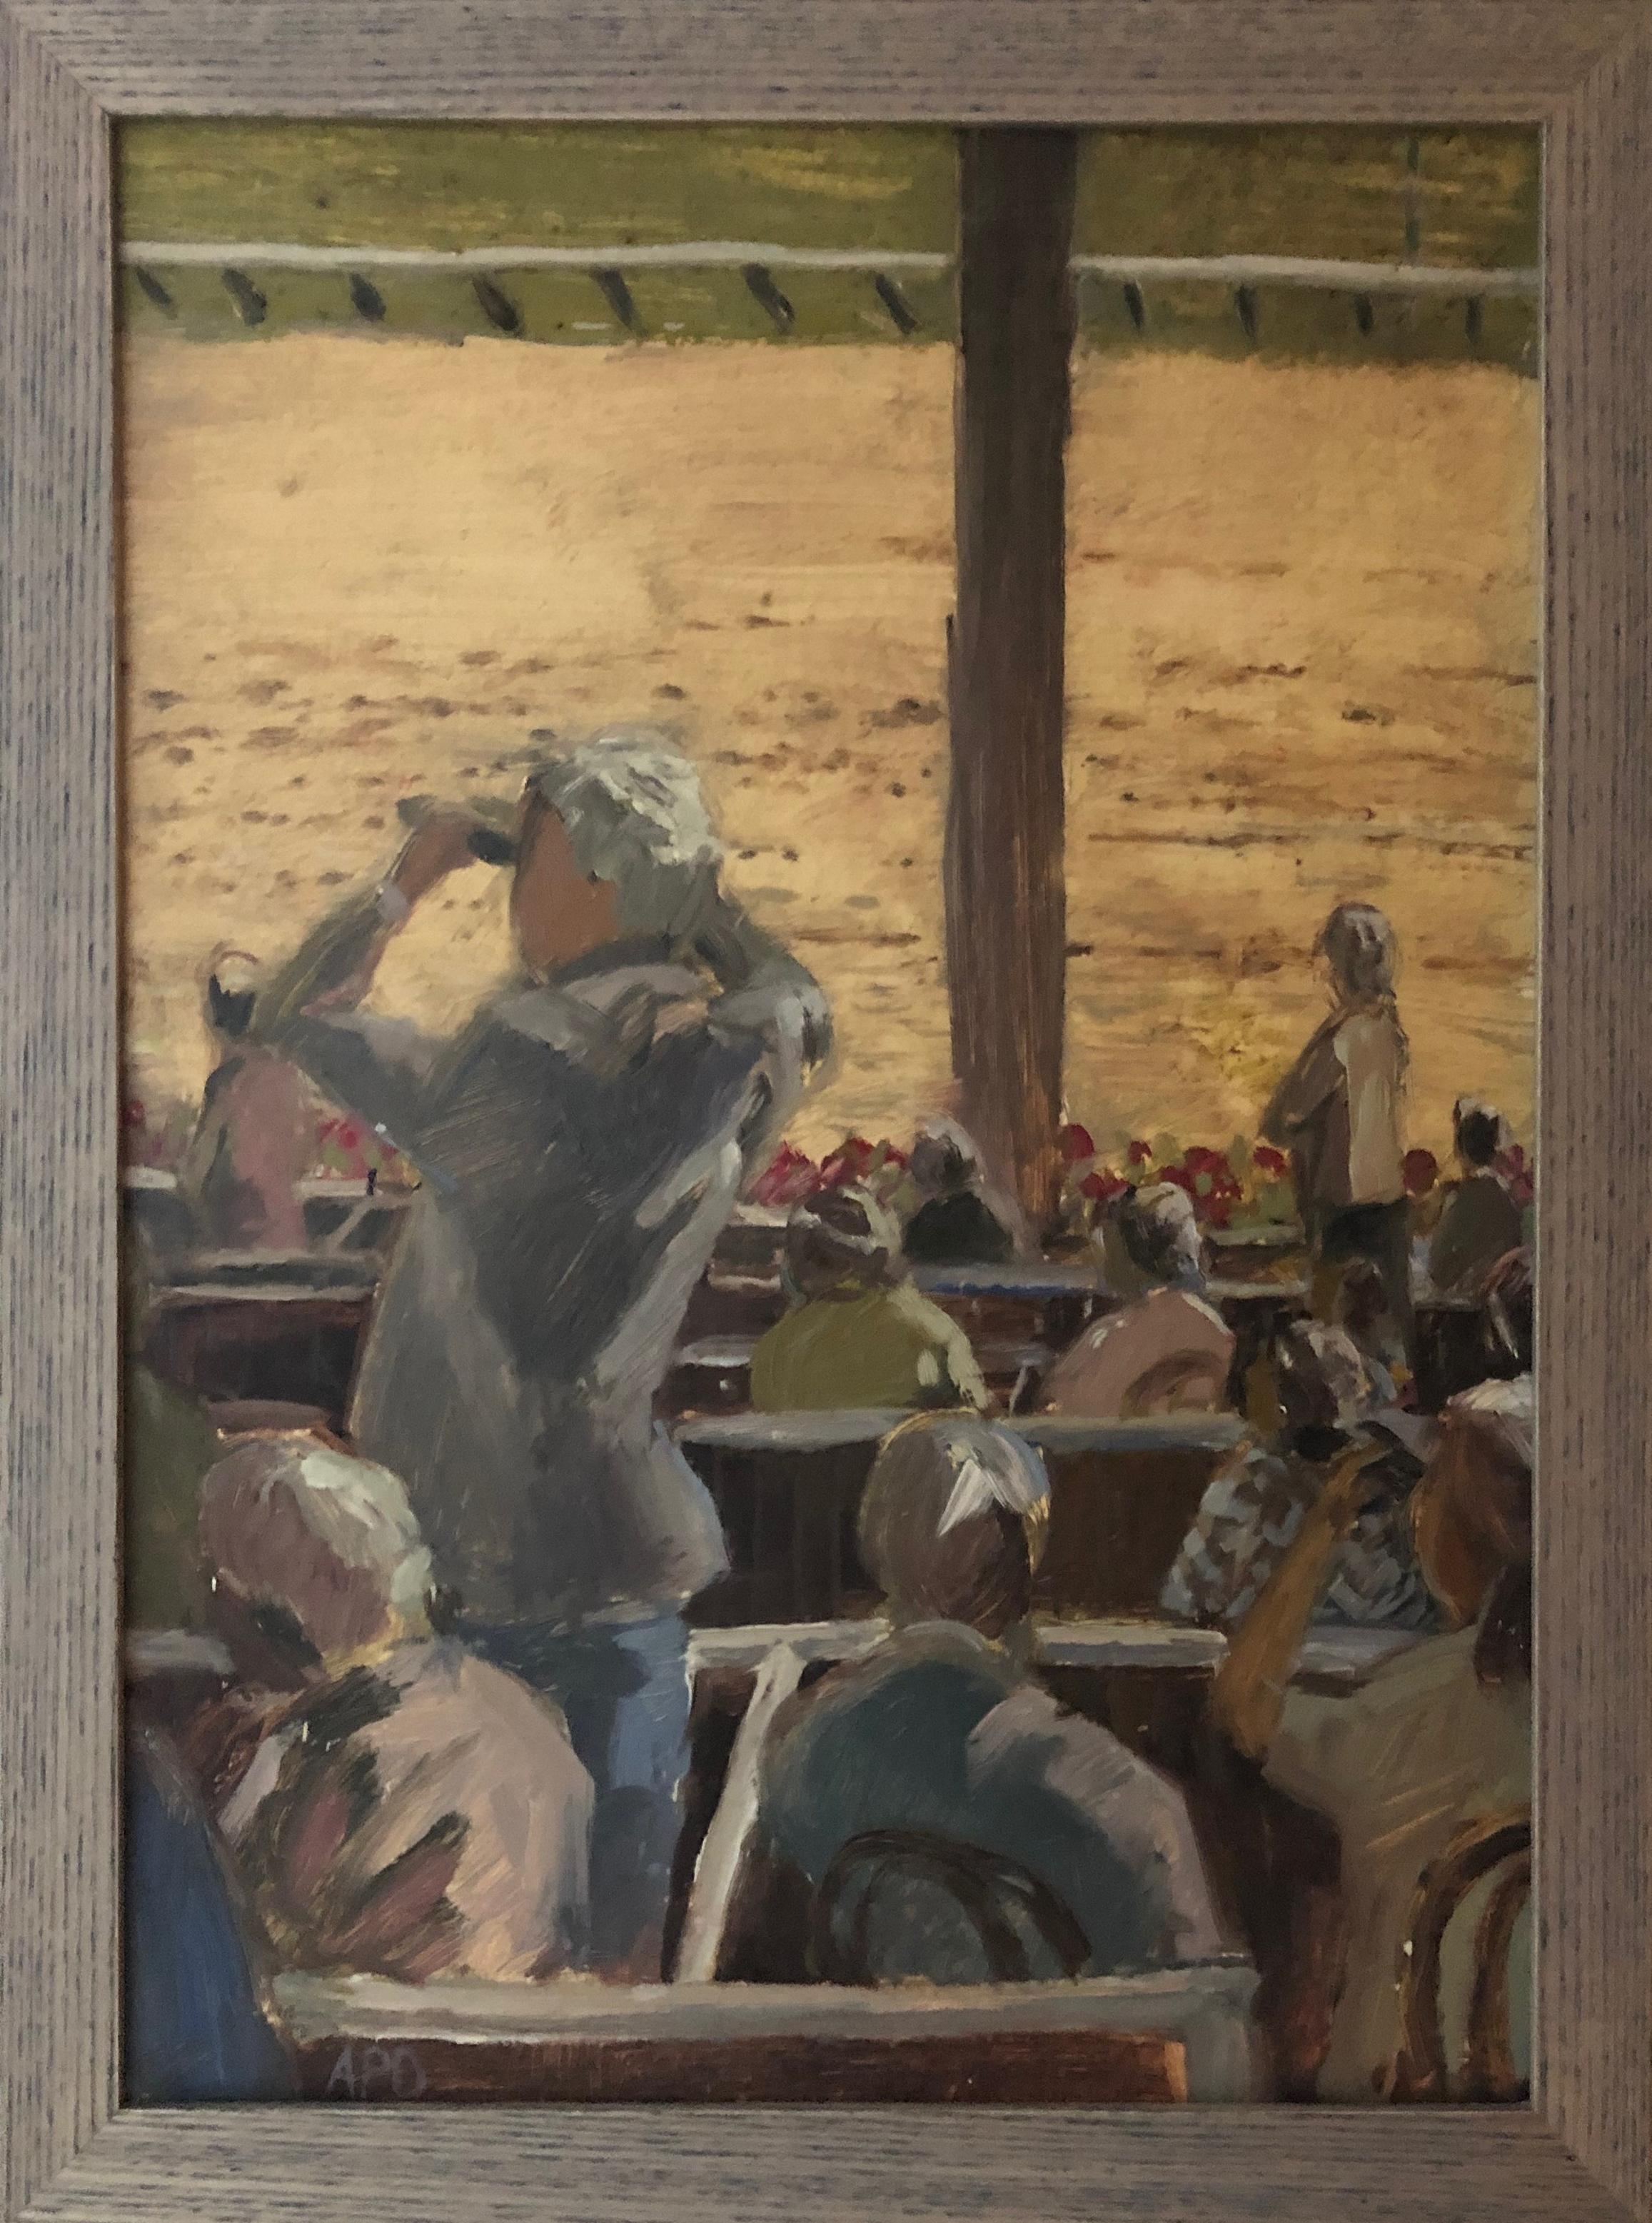 From the Boxes - View of Racetrack and Crowd, Saratoga Springs, New York - Painting by Anne Diggory